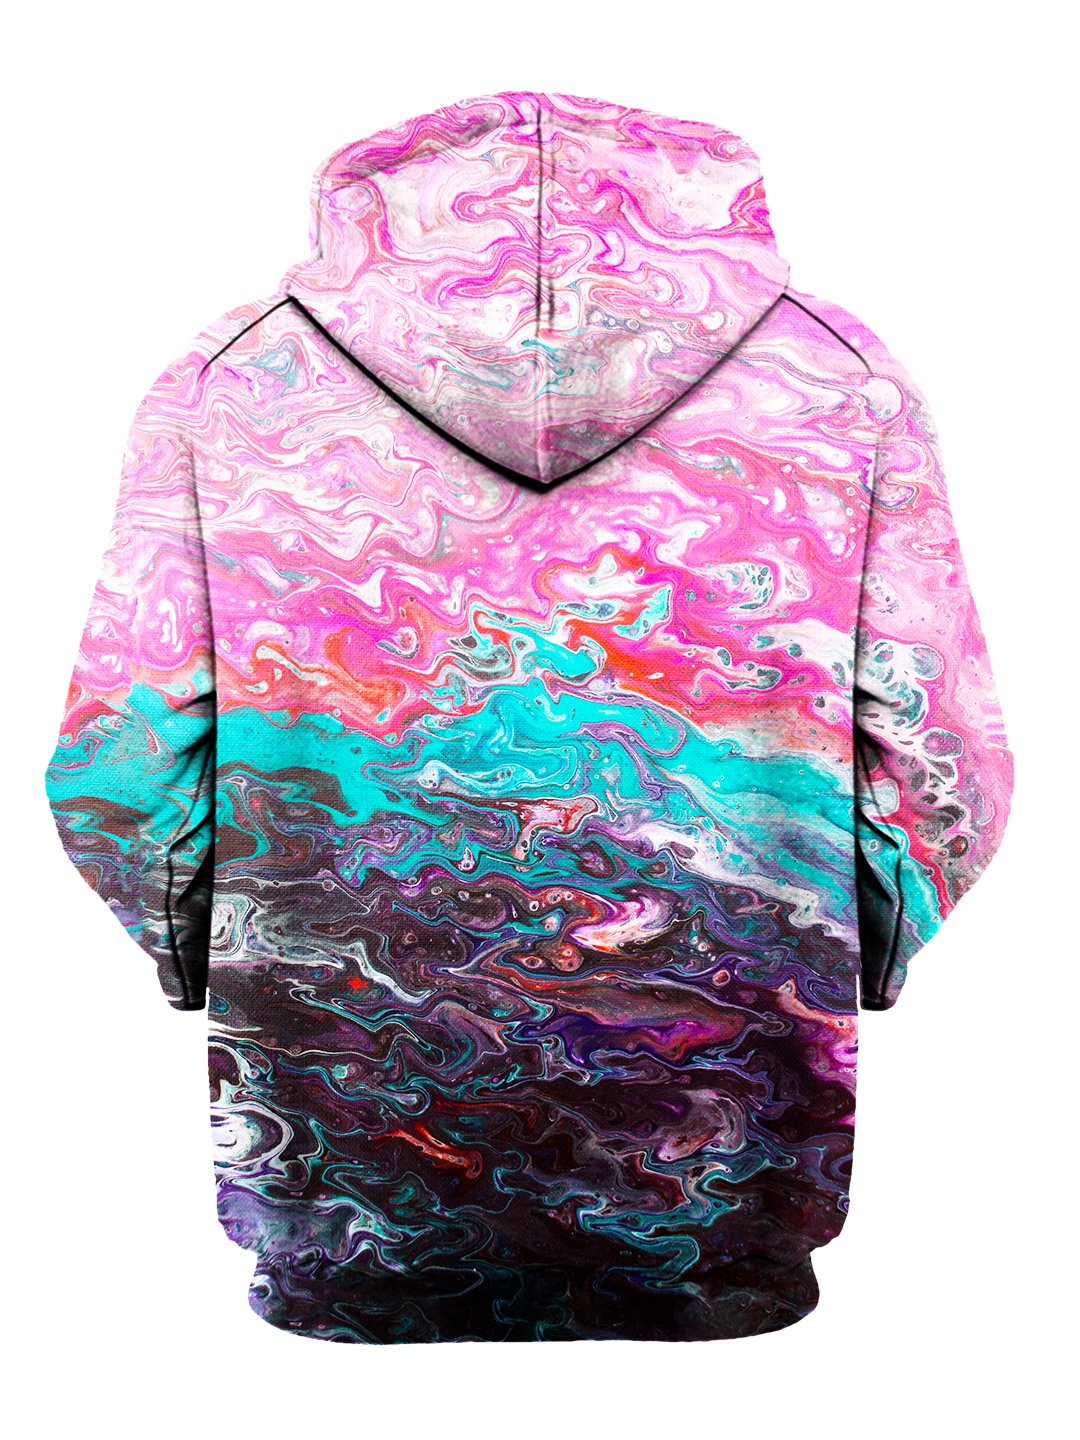 Back view of psychedelic marbling all over print hoody by Gratefully Dyed Apparel.